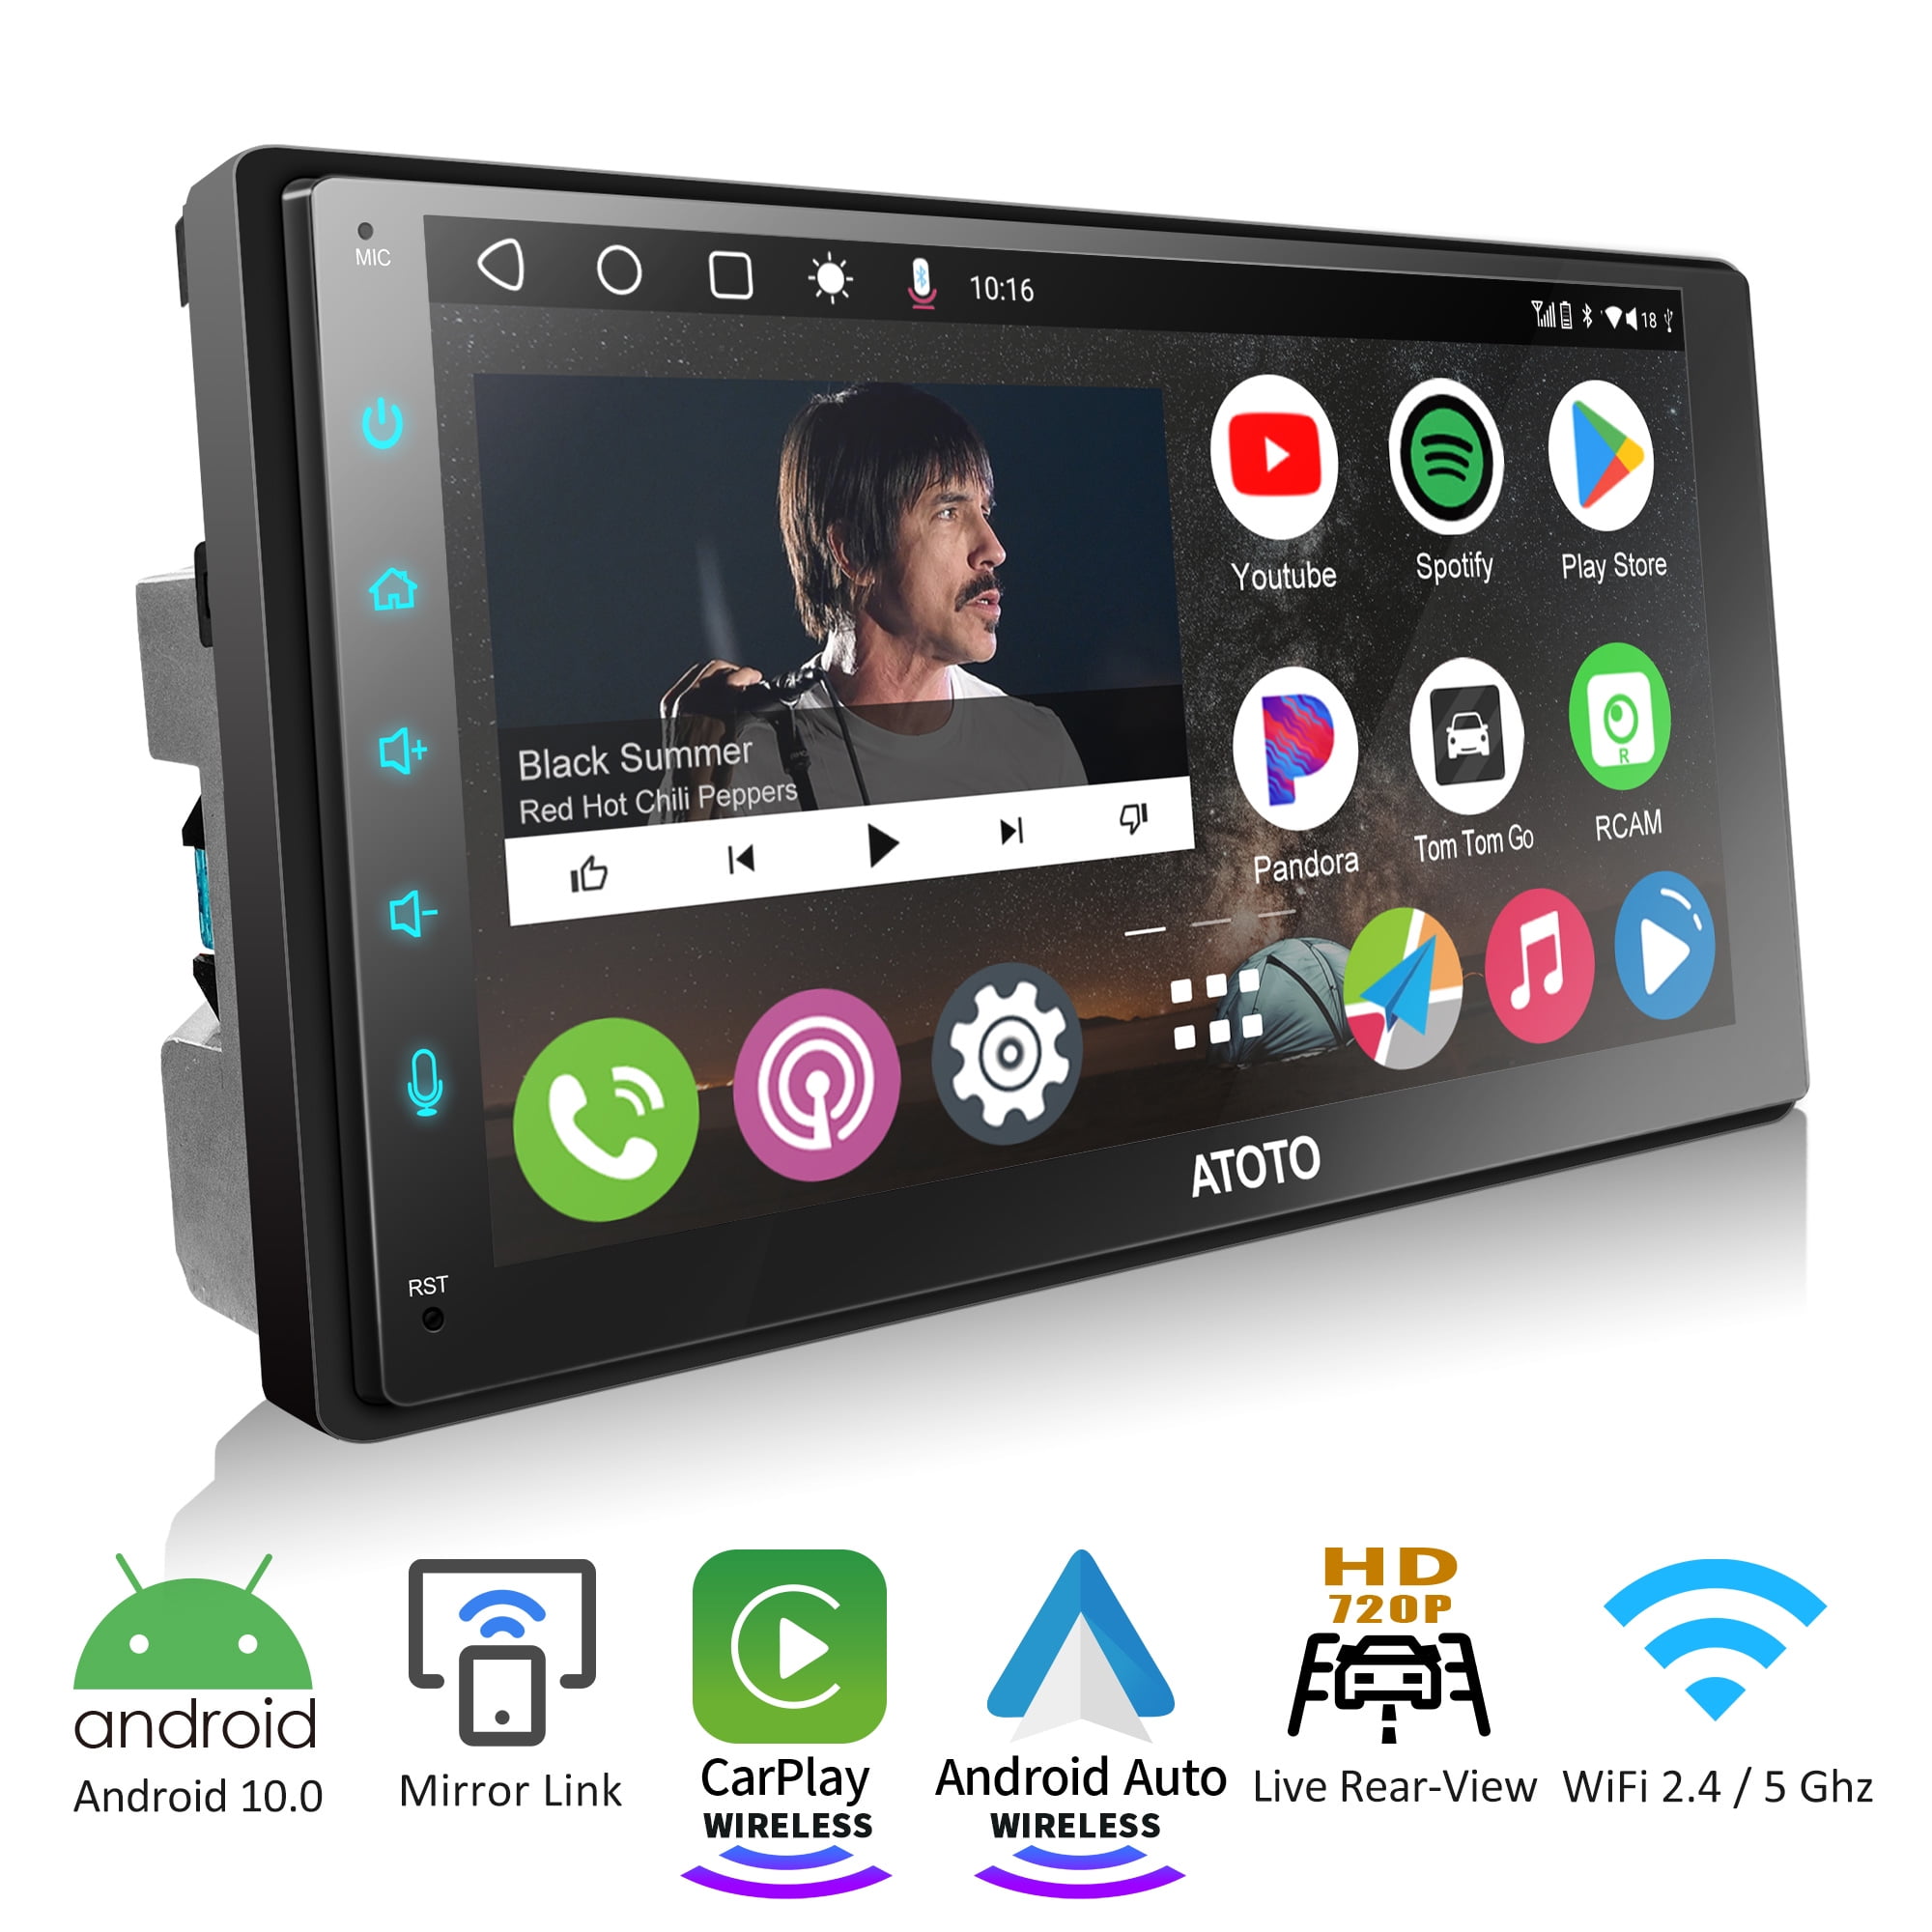 ATOTO 7inch Touchscreen Android Car Stereo Head Unit,A6PF Double Din  Wireless Apple Carplay&Wireless Android Auto with GPS Tracker,HD Camera  Input 